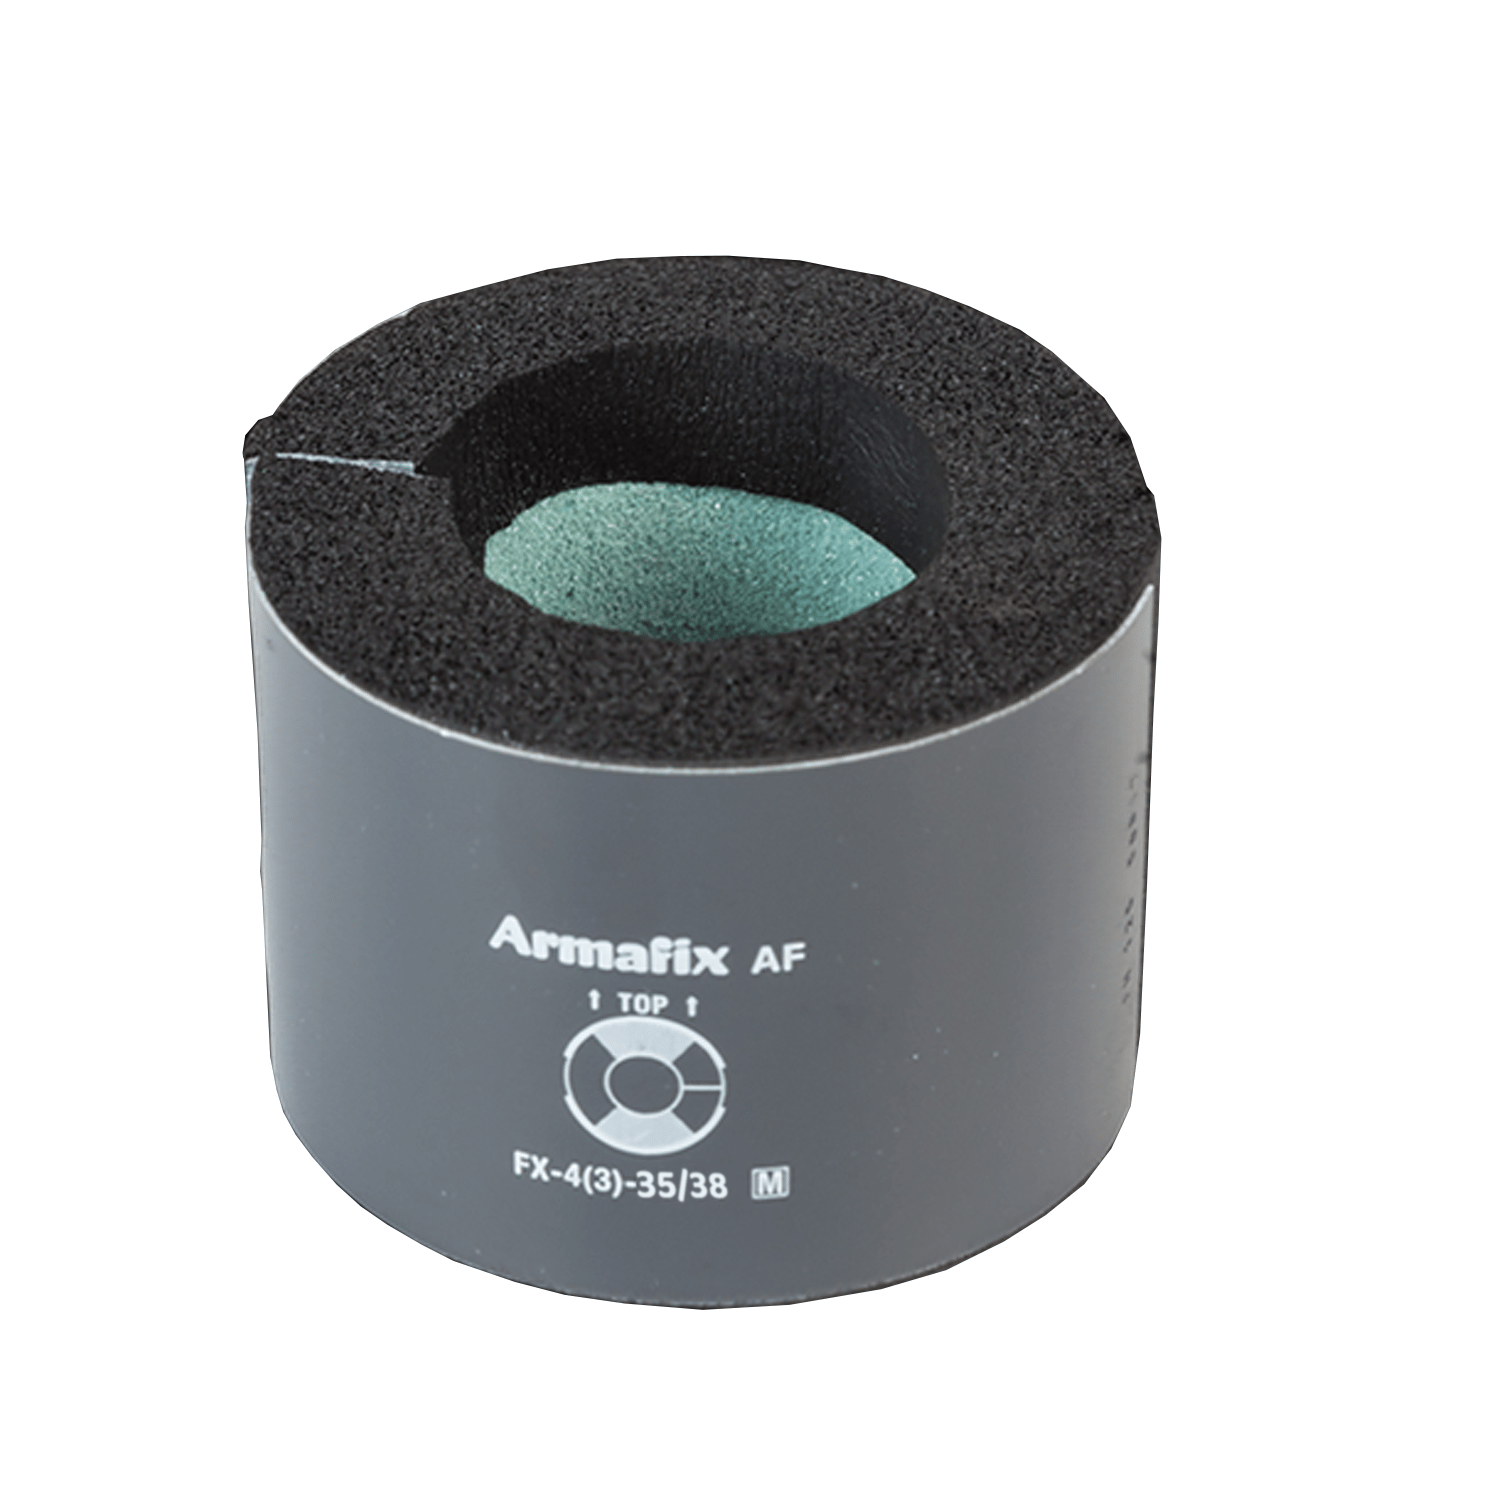 Pipe support, outer Ø 74-79 mm ARMAFLEX ARMAFIX FX-4 (3)-35/38